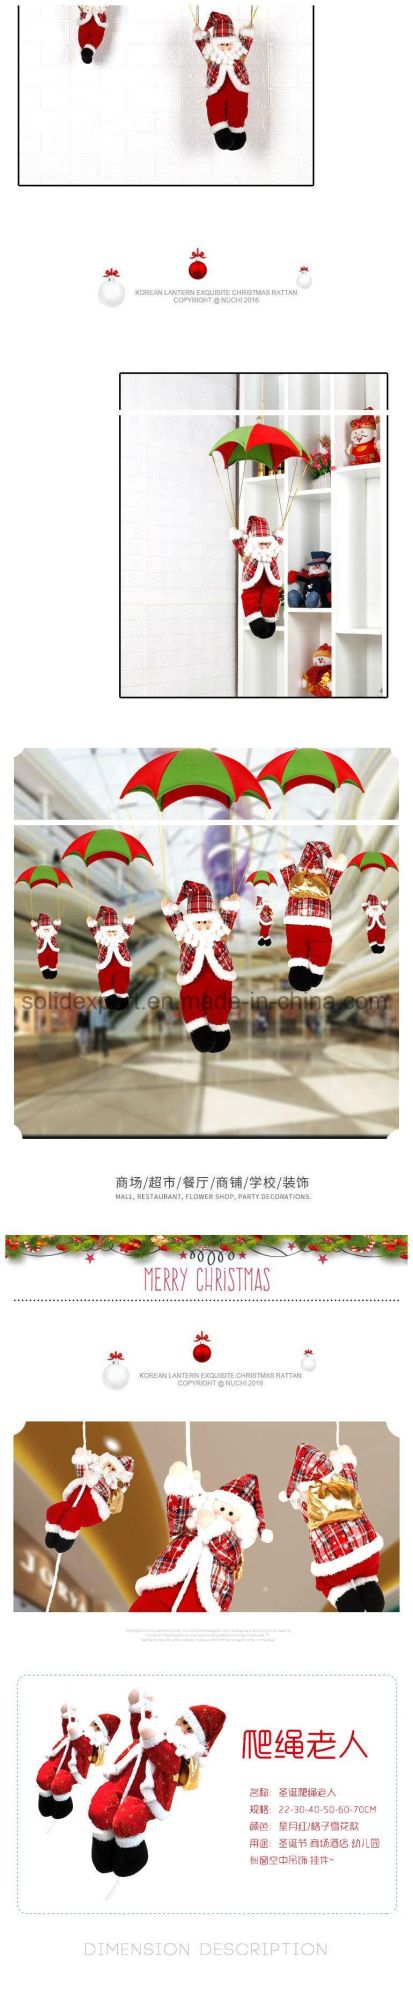 Santa Claus Skydiving Rope Climbing Father Gift Decoration